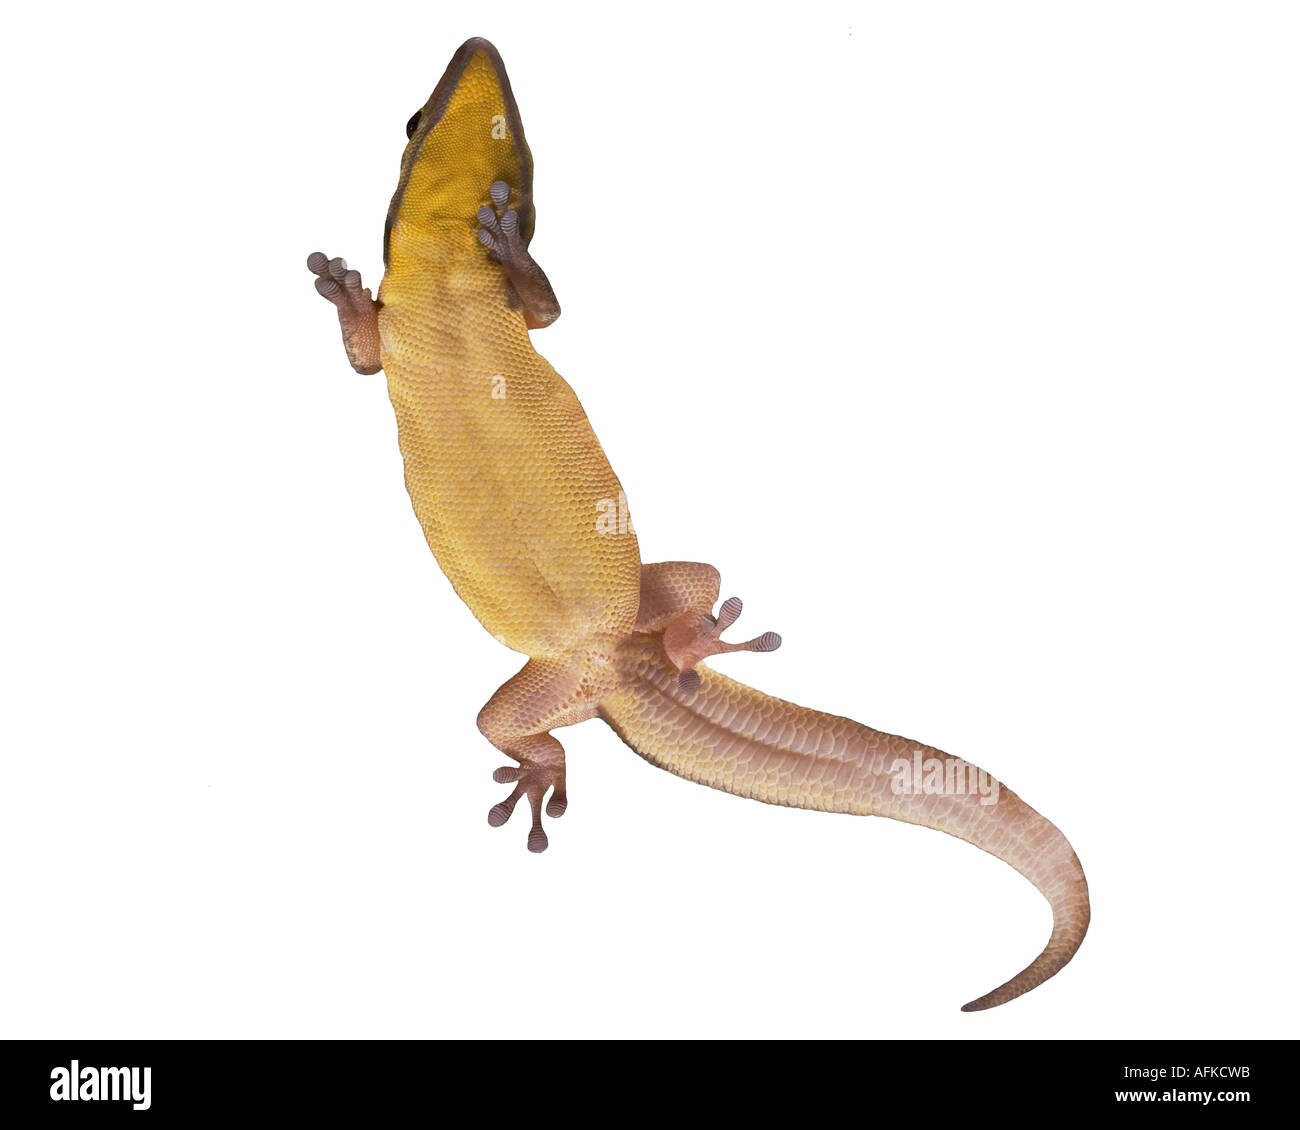 Underneath of Yellow-headed Day Gecko clinging to polished glass Stock Photo